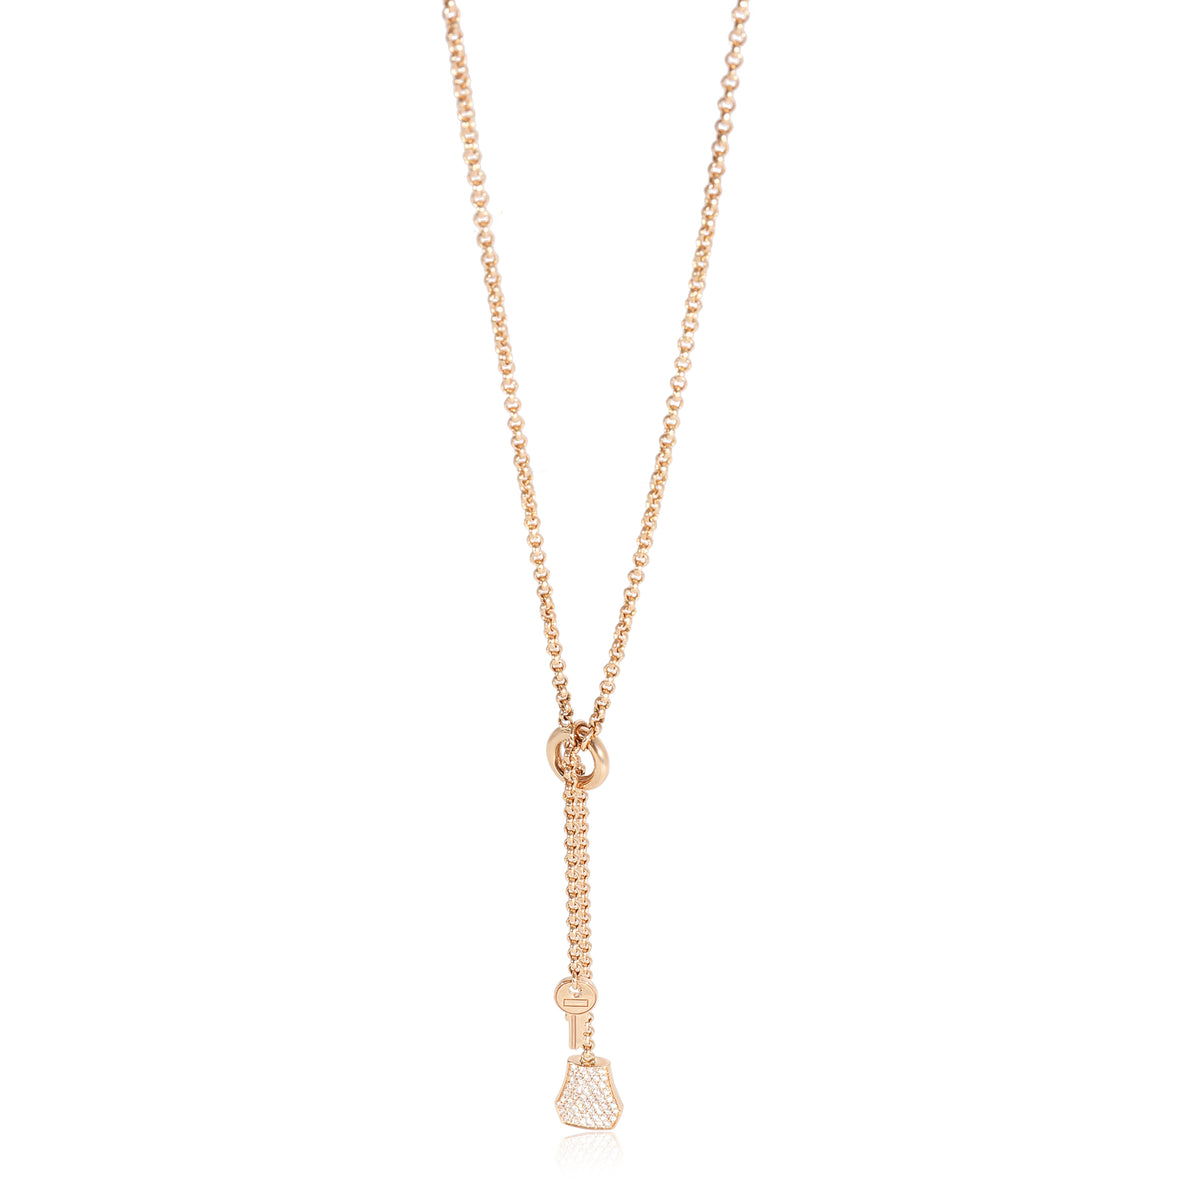 Hermes Kelly Clochette Necklace, Small Model in 18K Rose Gold 0.53 CTW